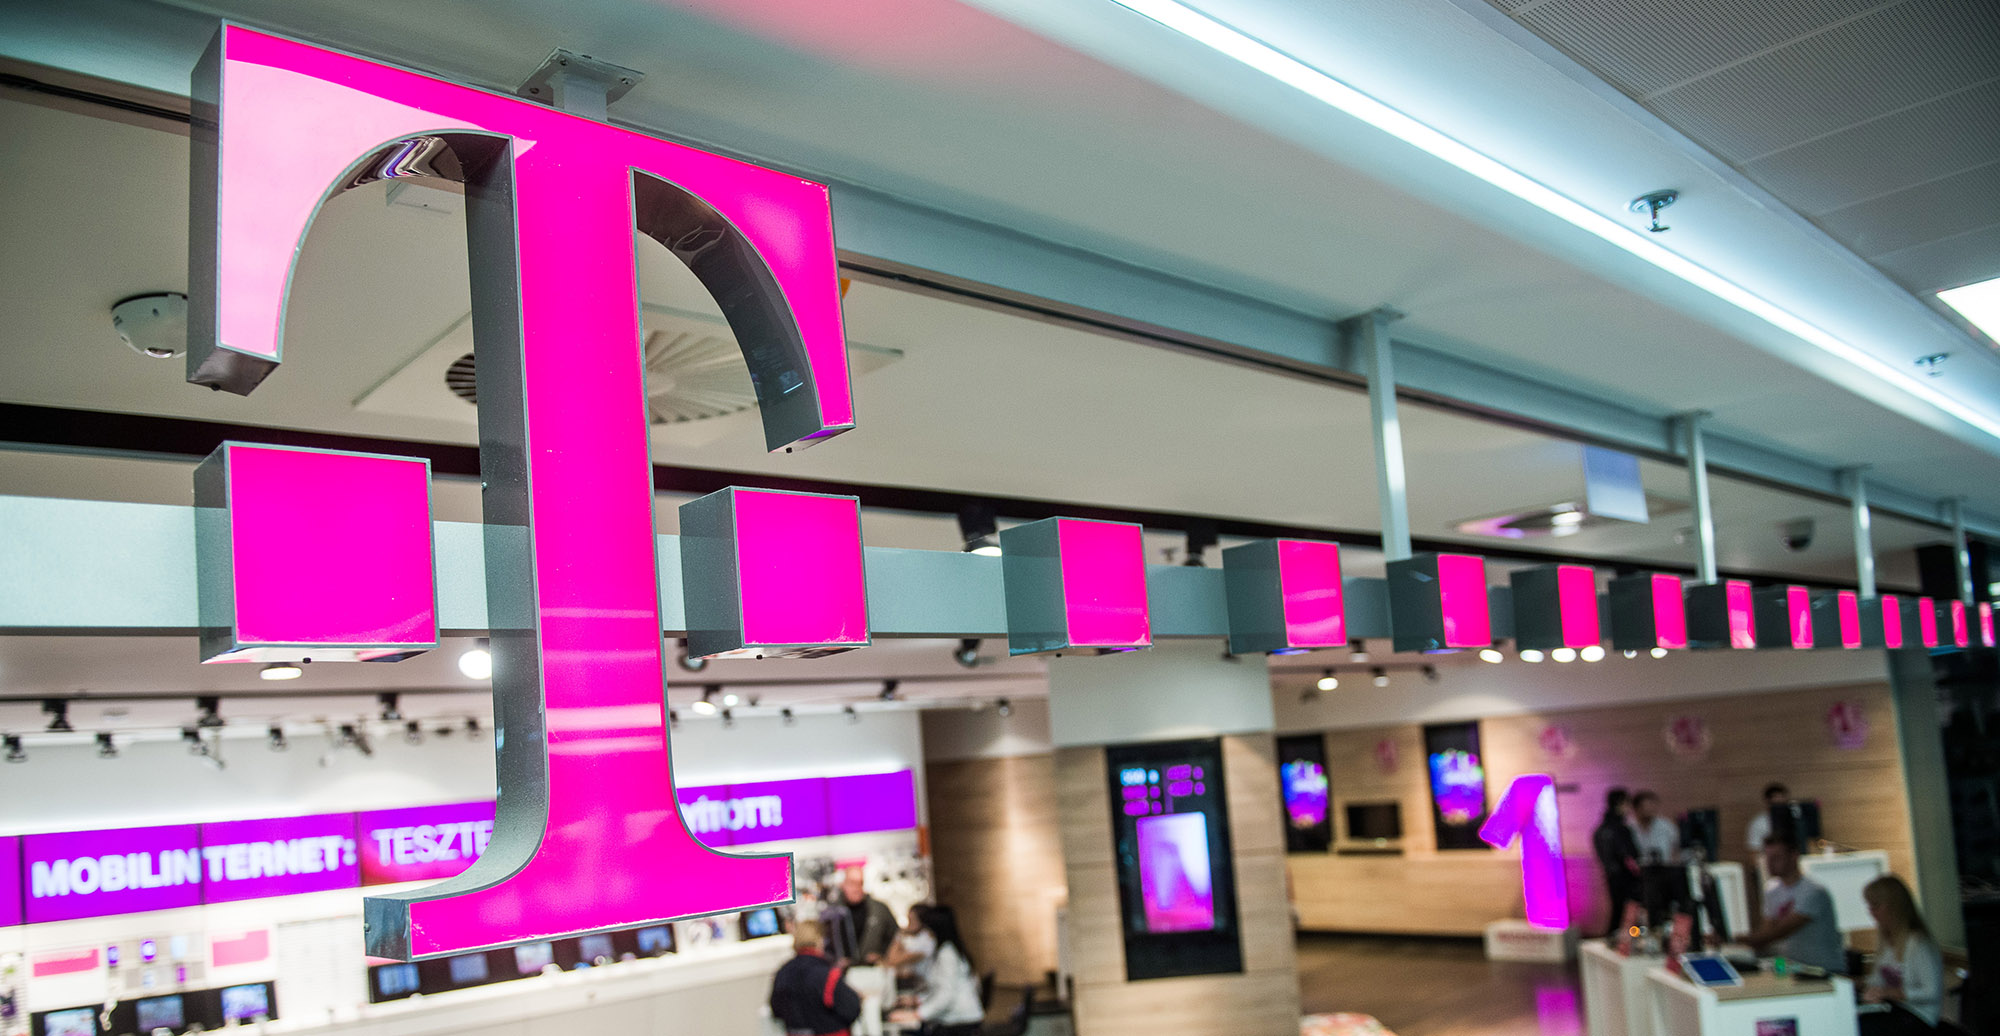 T-Mobile Glitch Shows Customer Data to Wrong Account Holders - Bloomberg